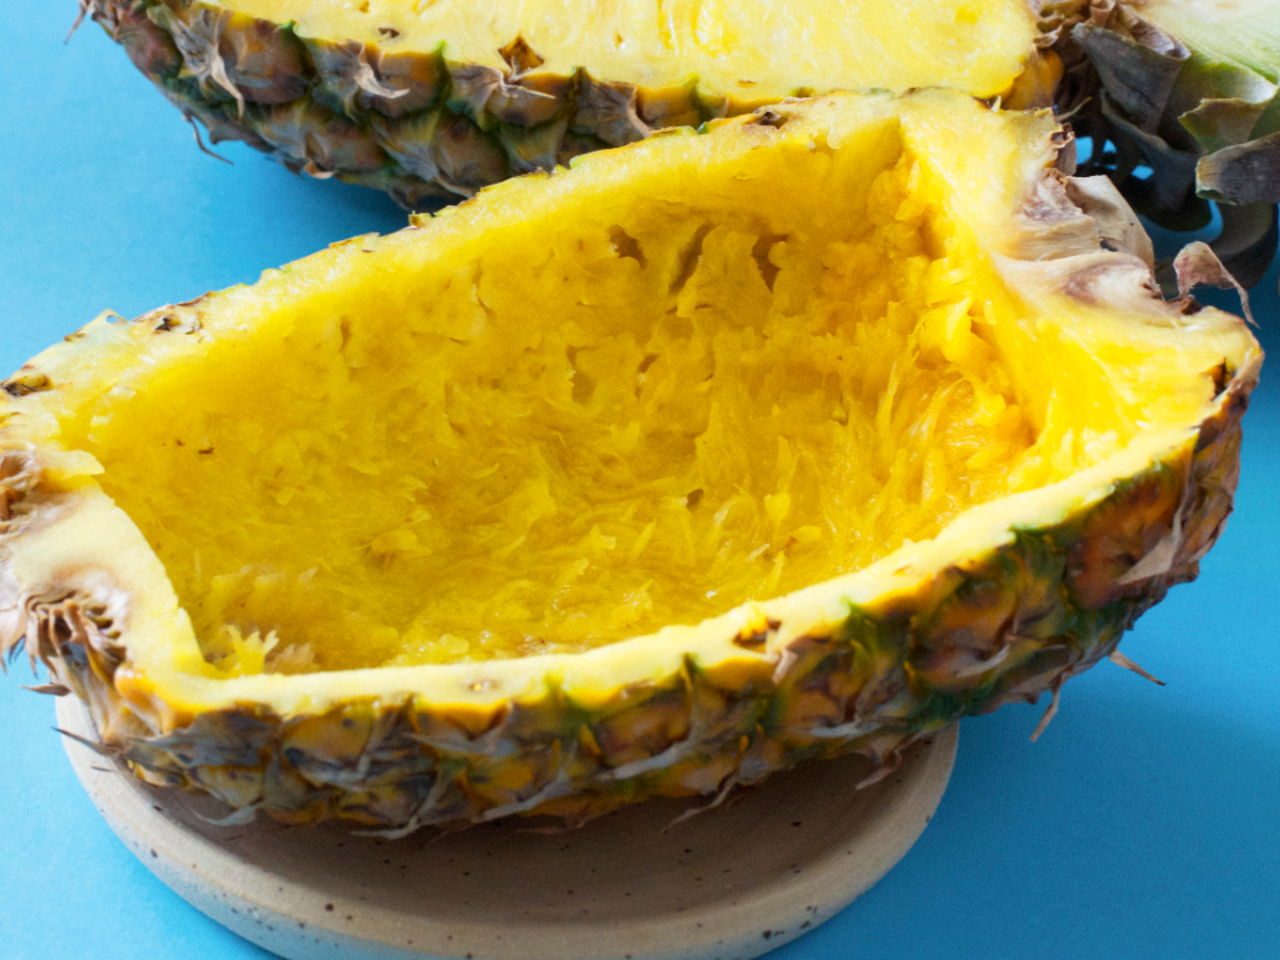 How To Make A Pineapple Bowl - Savor the Best